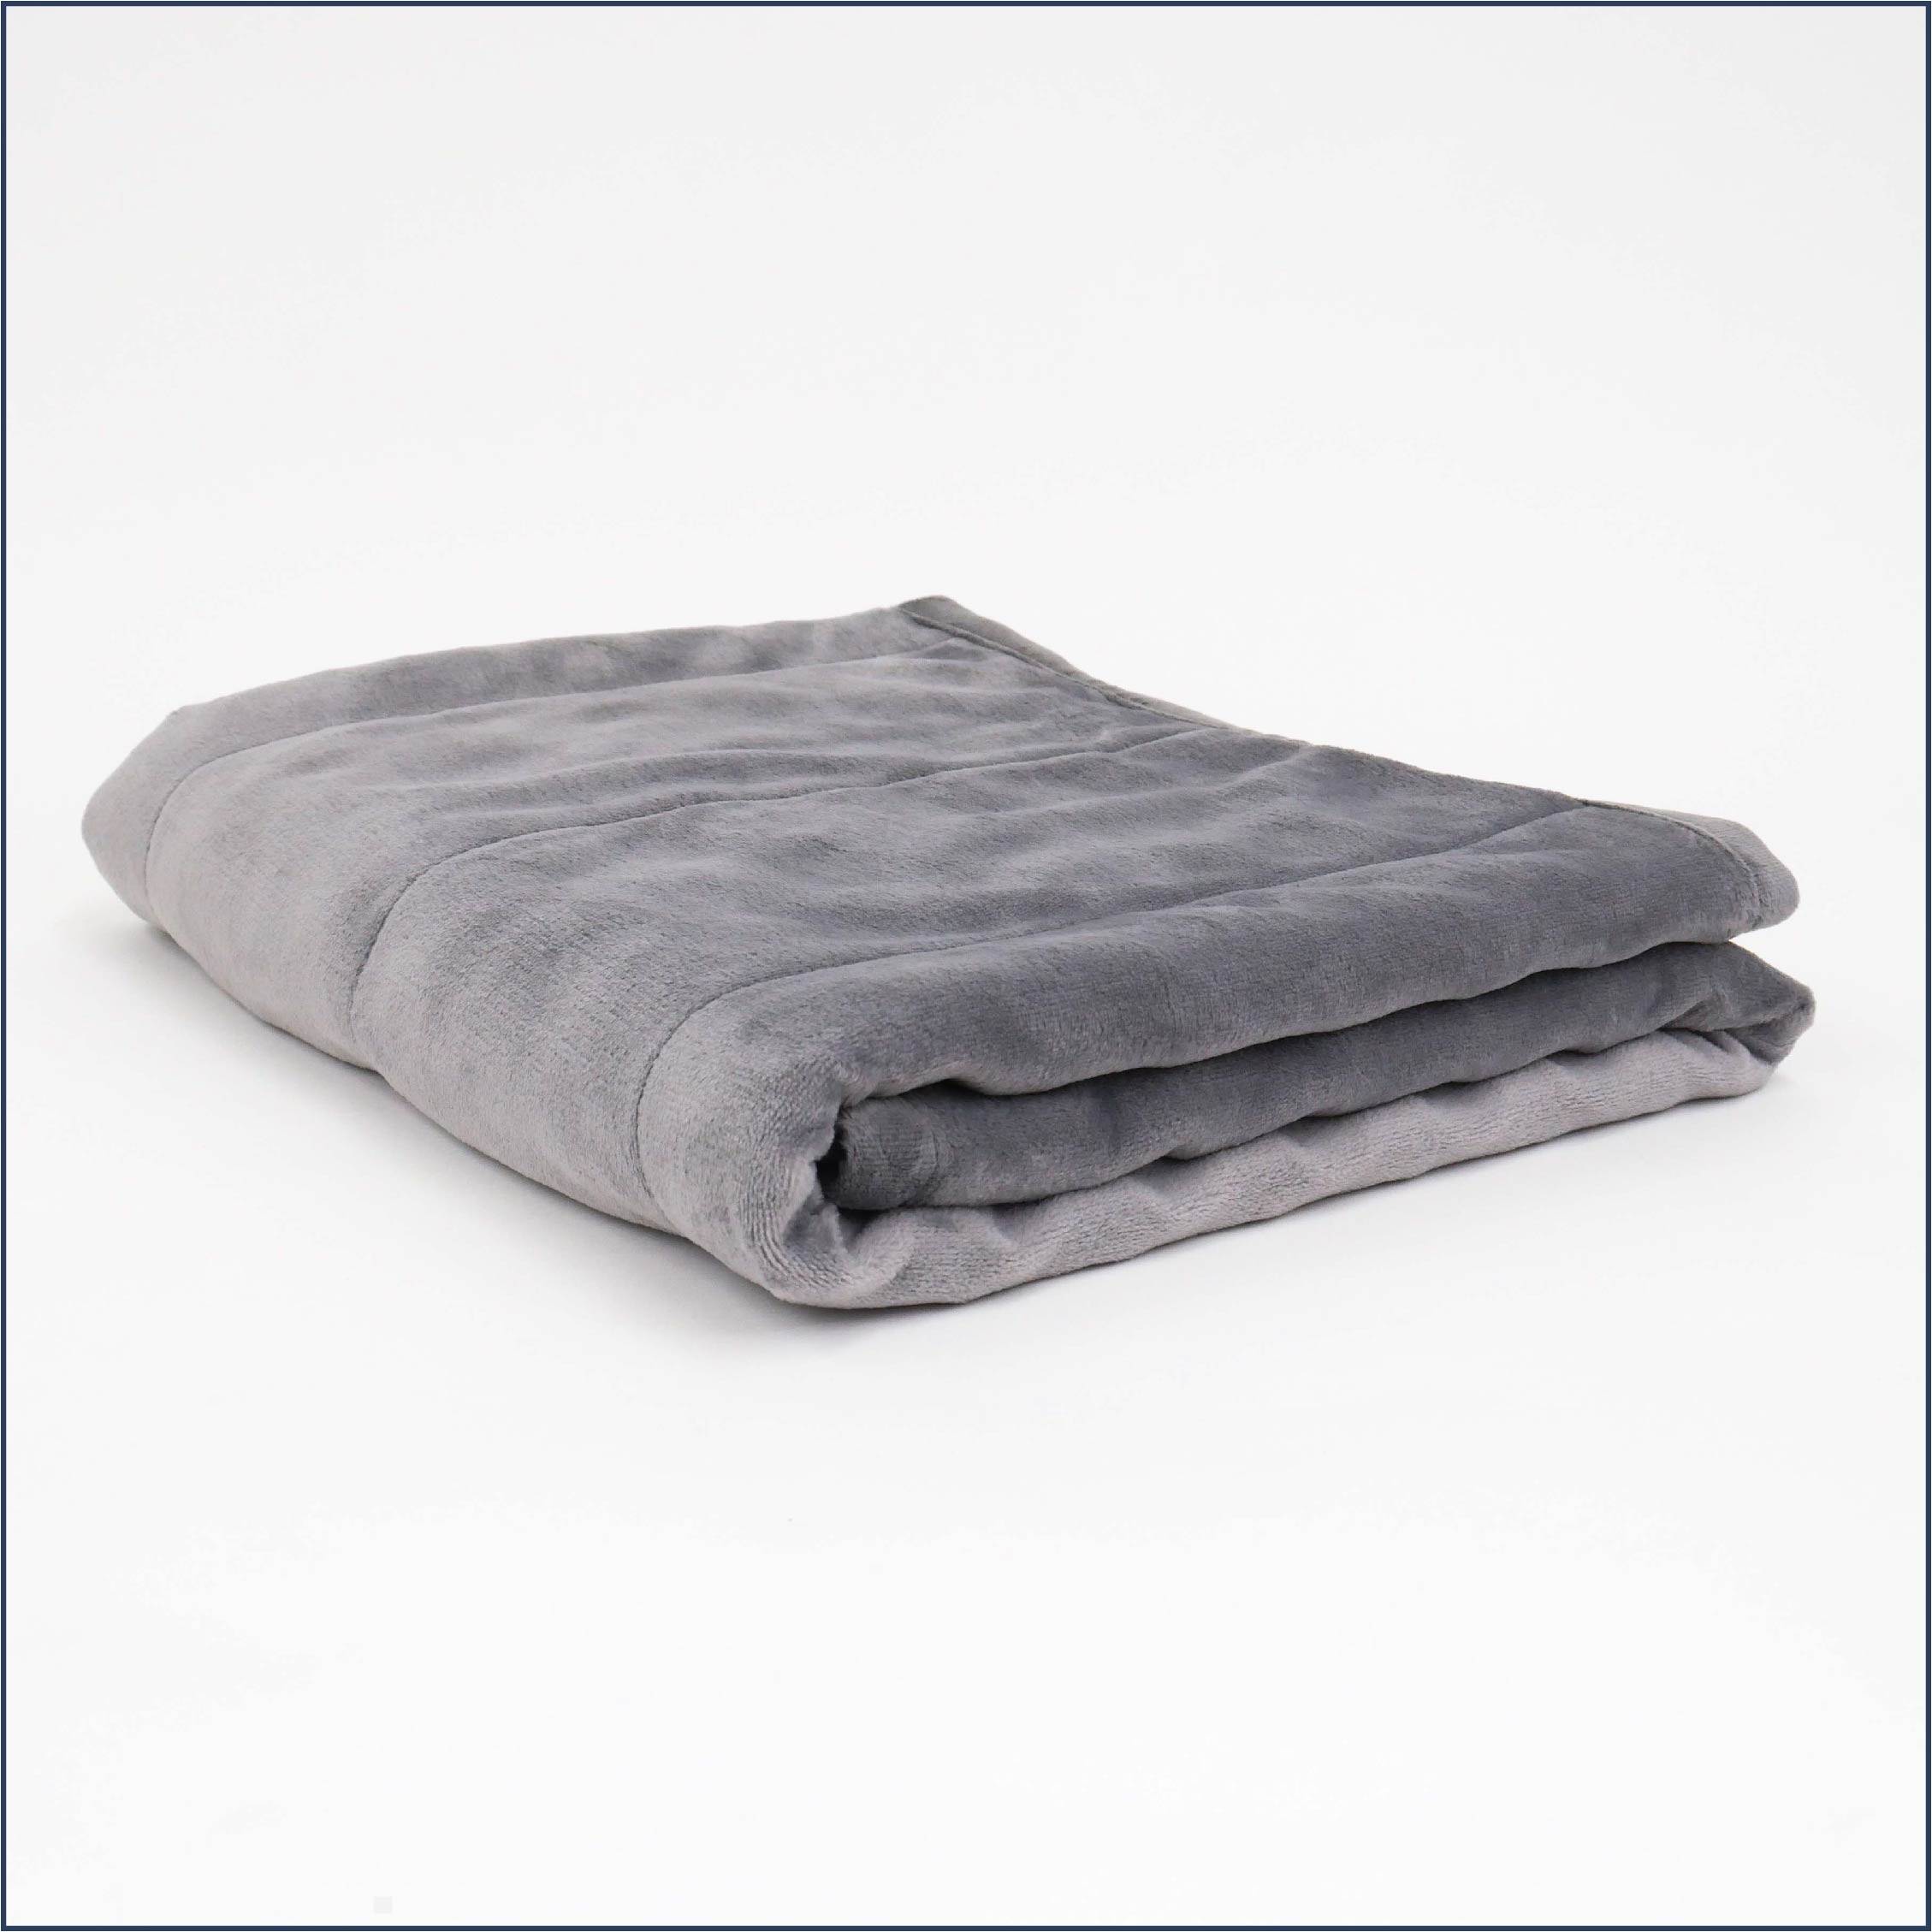 Tuc Kids Warm Weighted Blanket folded on white background.